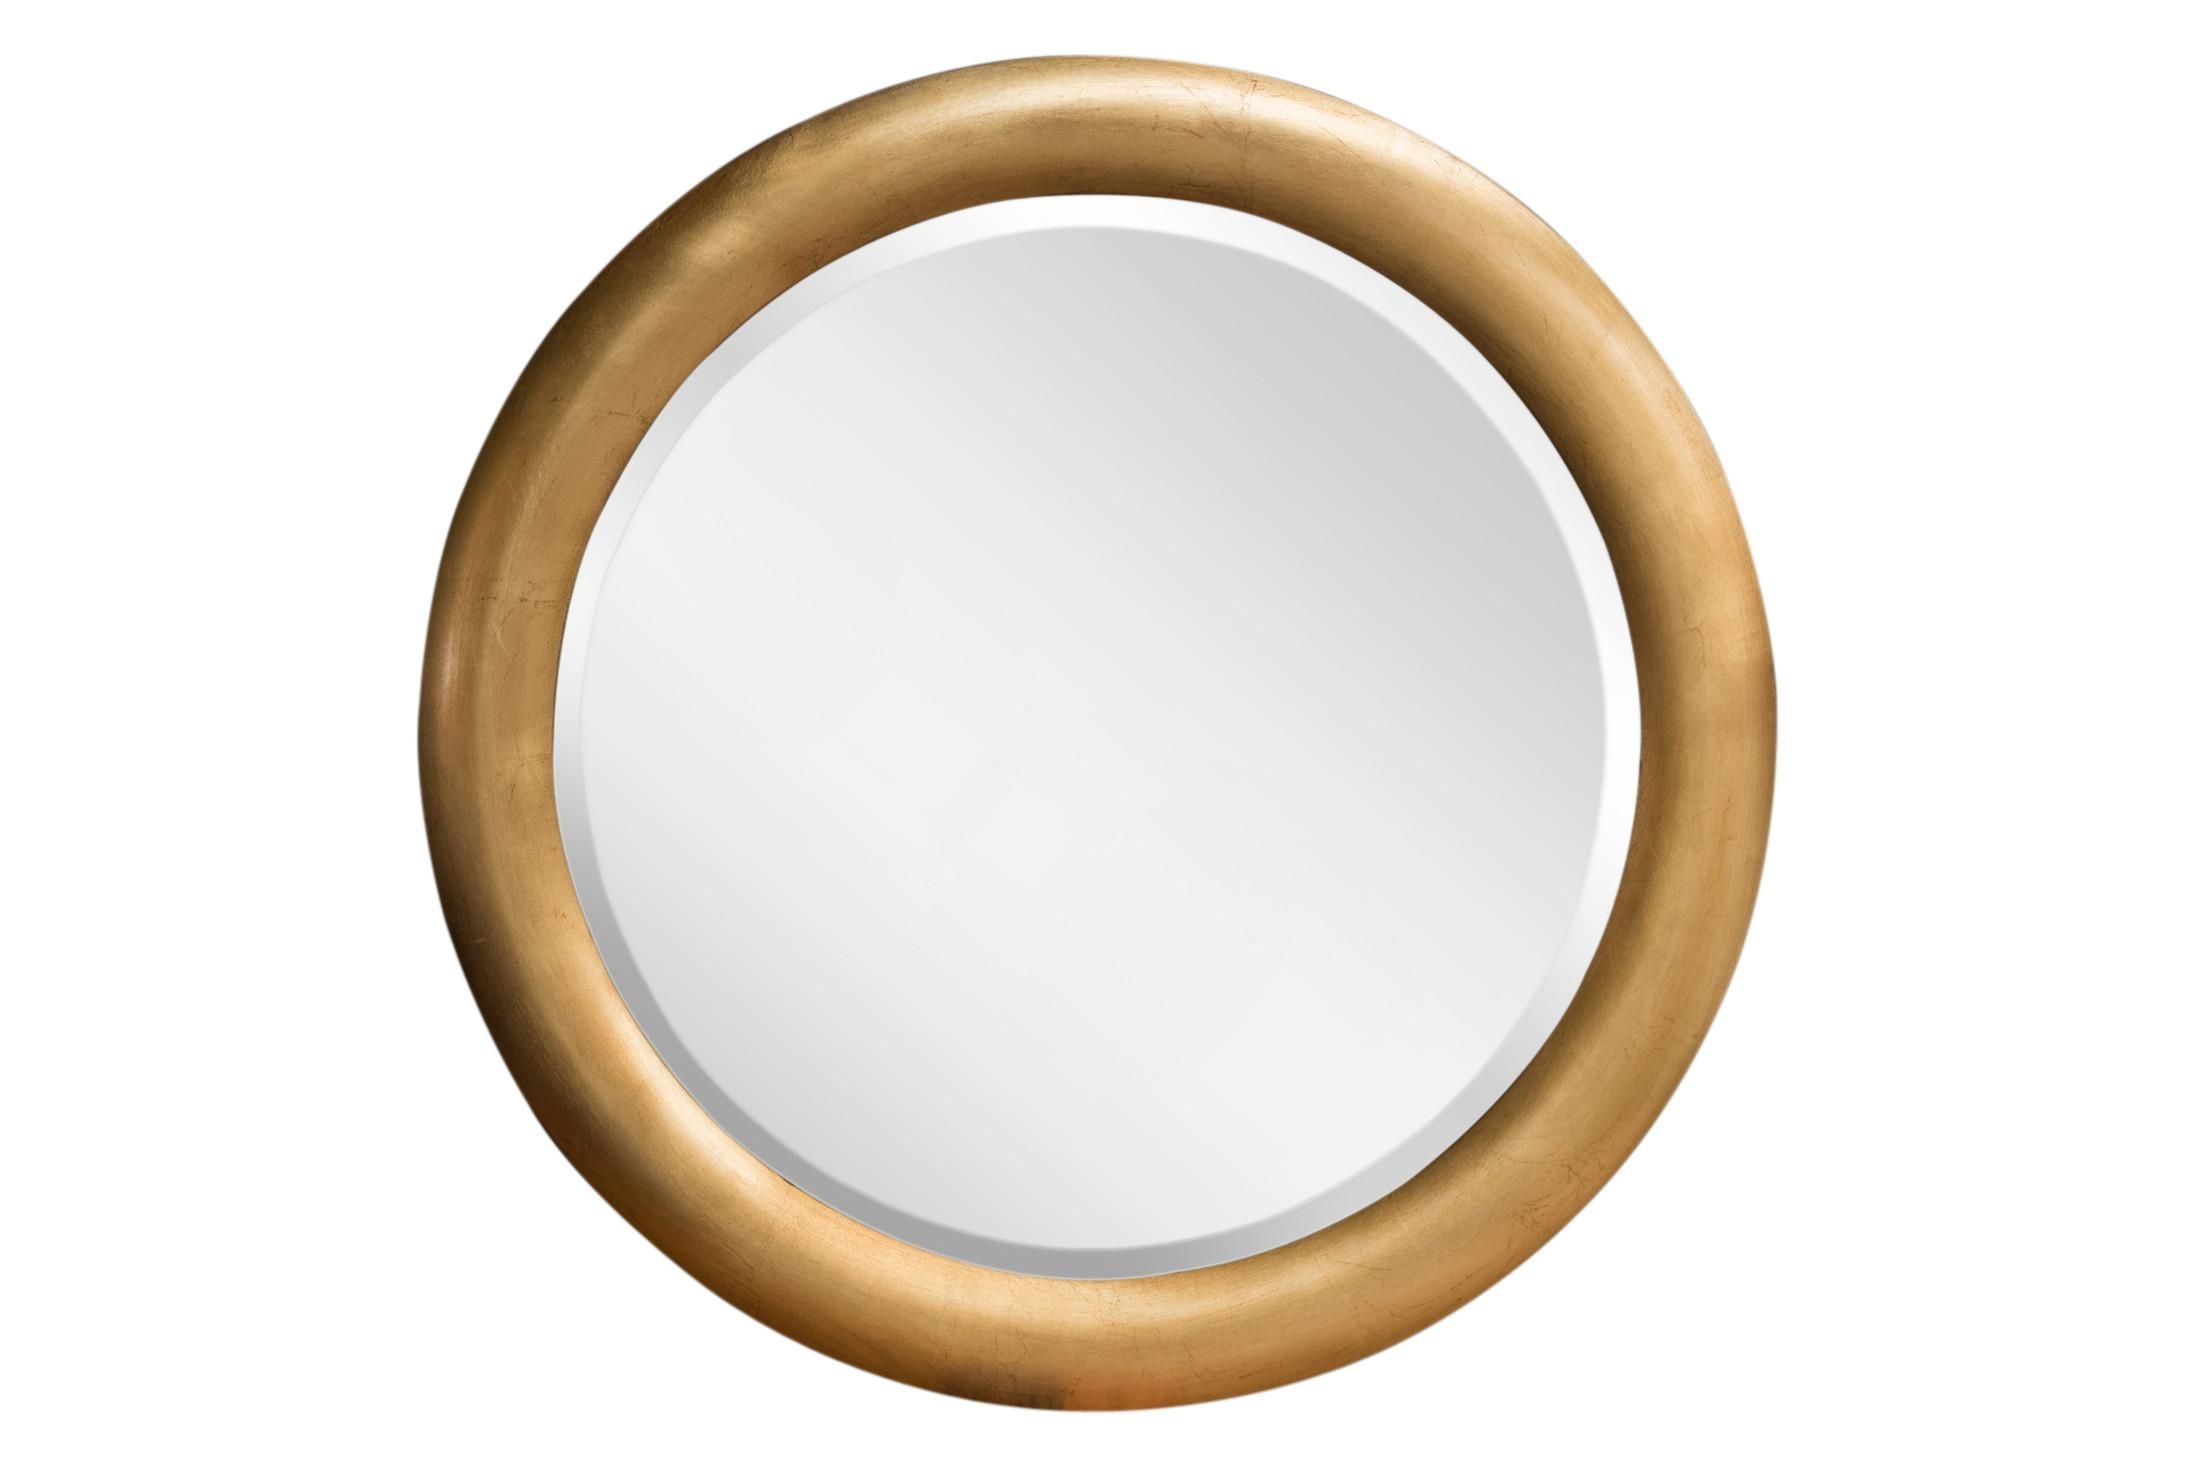 Infinity Mirror | Silver Mirrors For Sale – Panfili Mirrors Within Round Mirror For Sale (View 19 of 20)